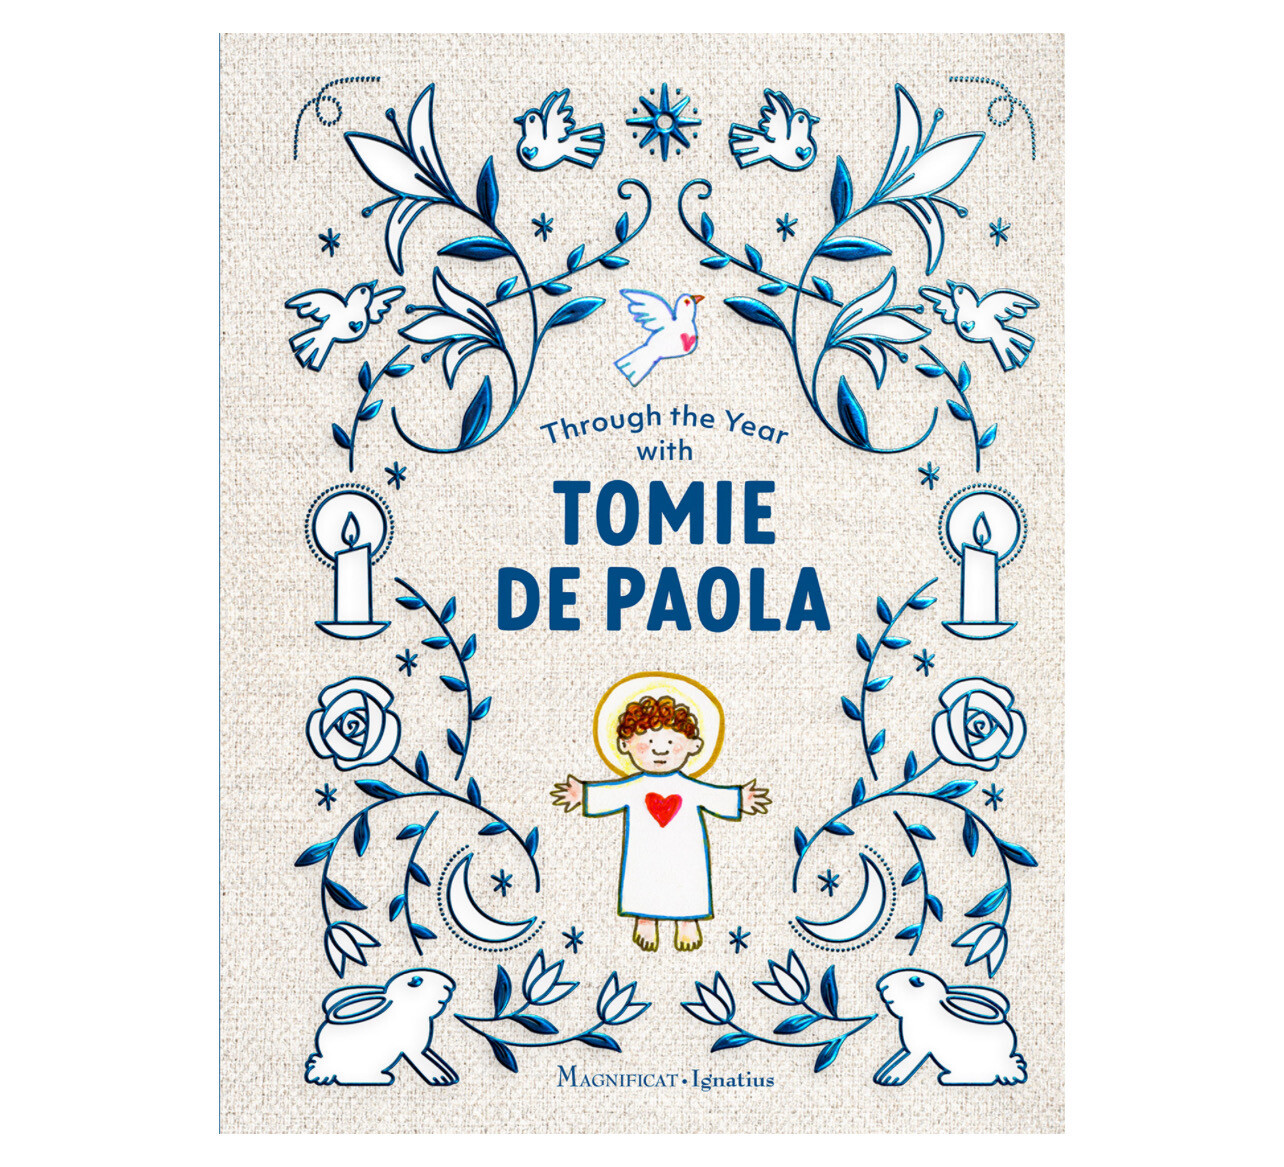 Through the Year with Tomie de Paola